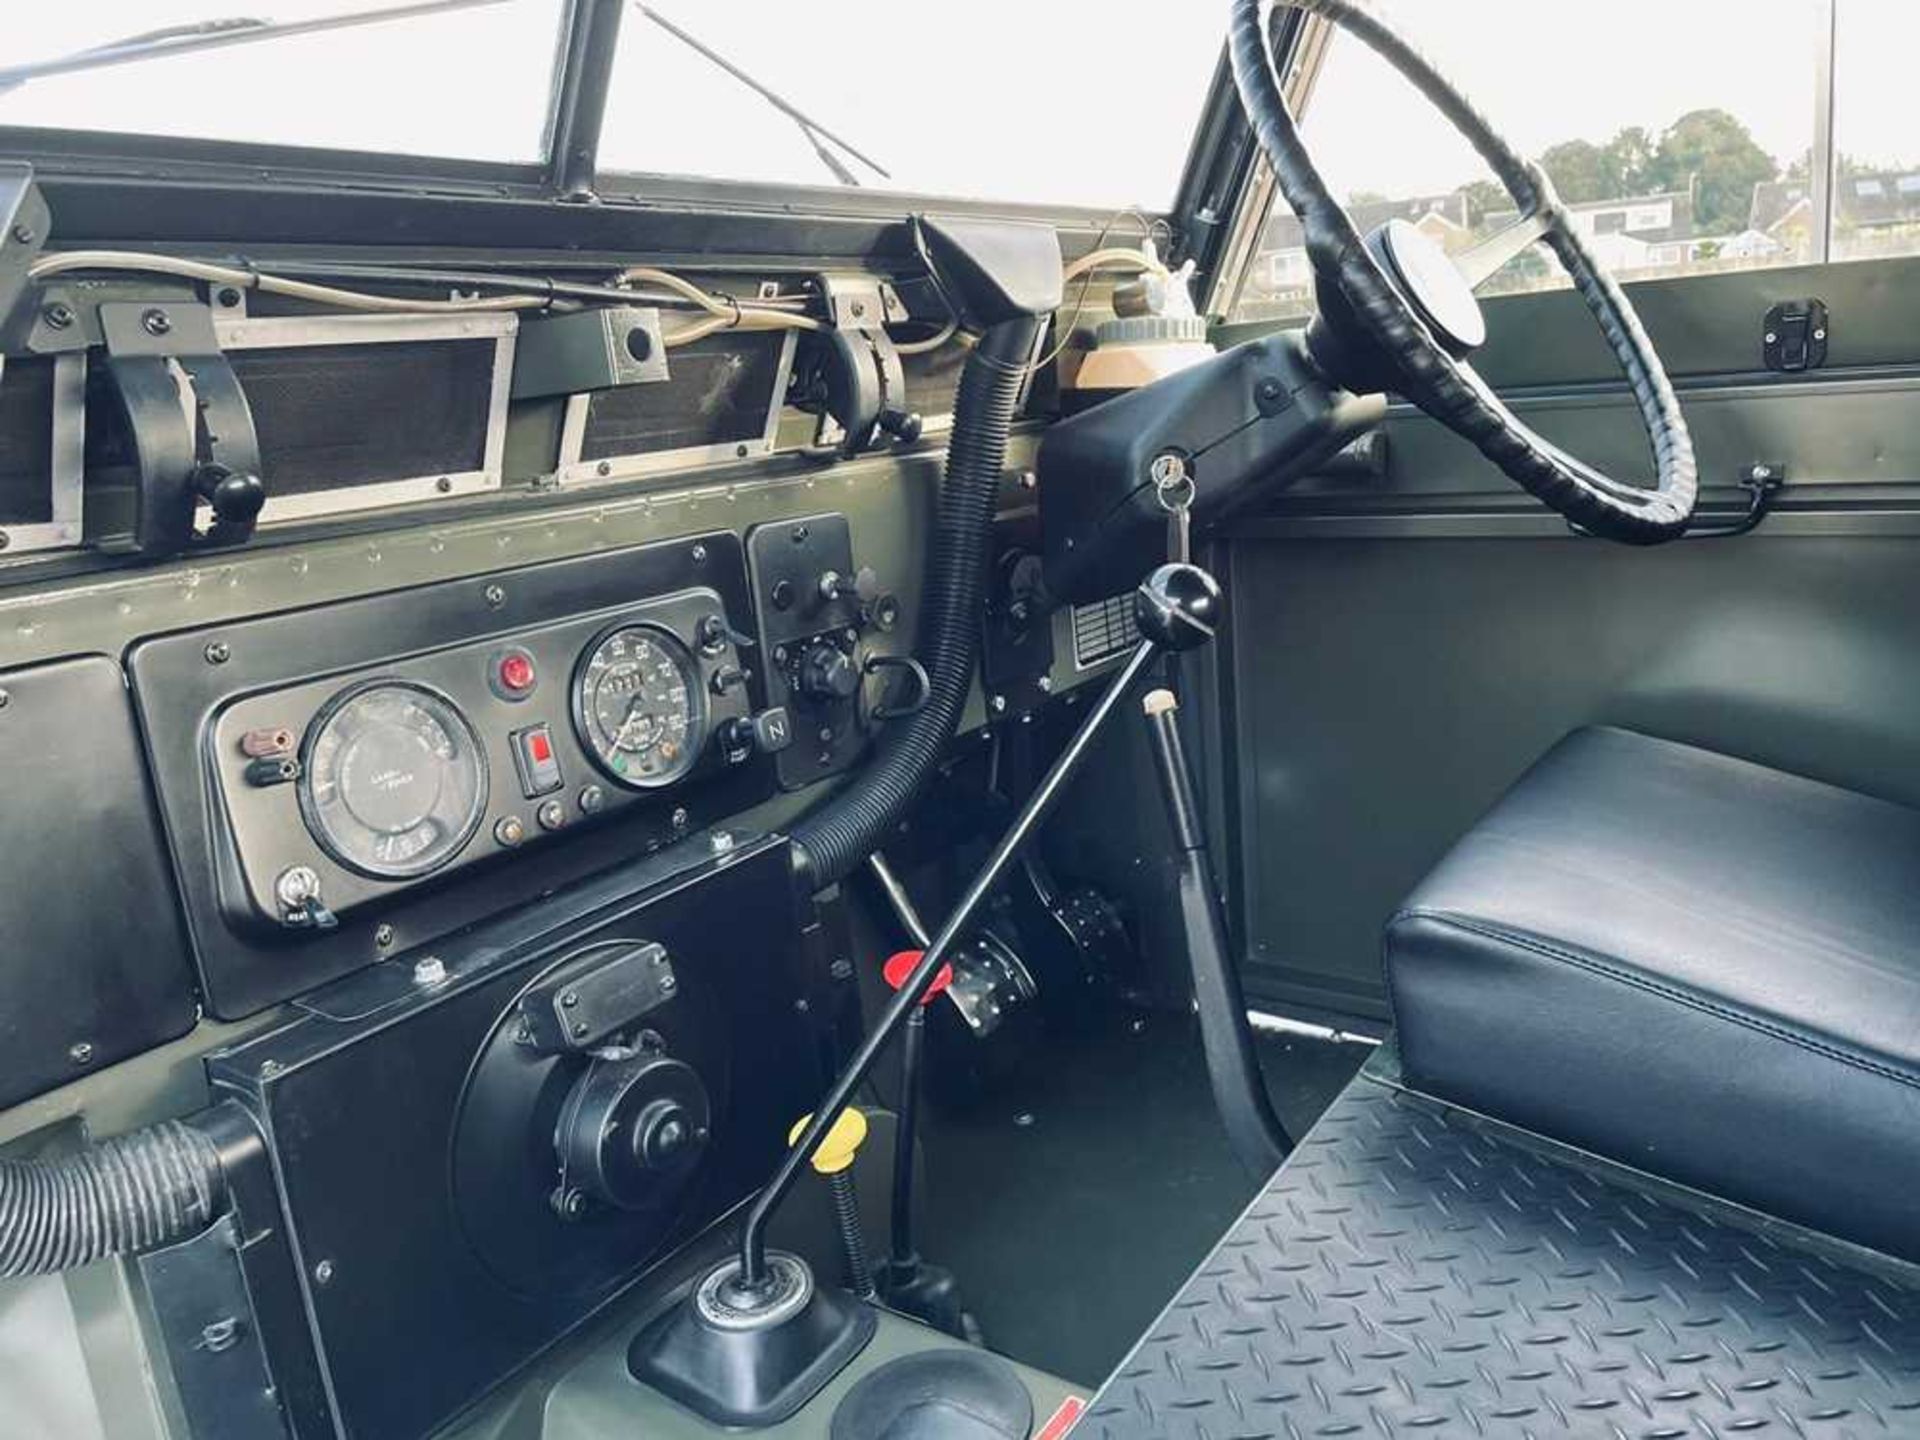 1972 Land Rover 88 Lightweight Extensive restoration recently completed - Image 13 of 22